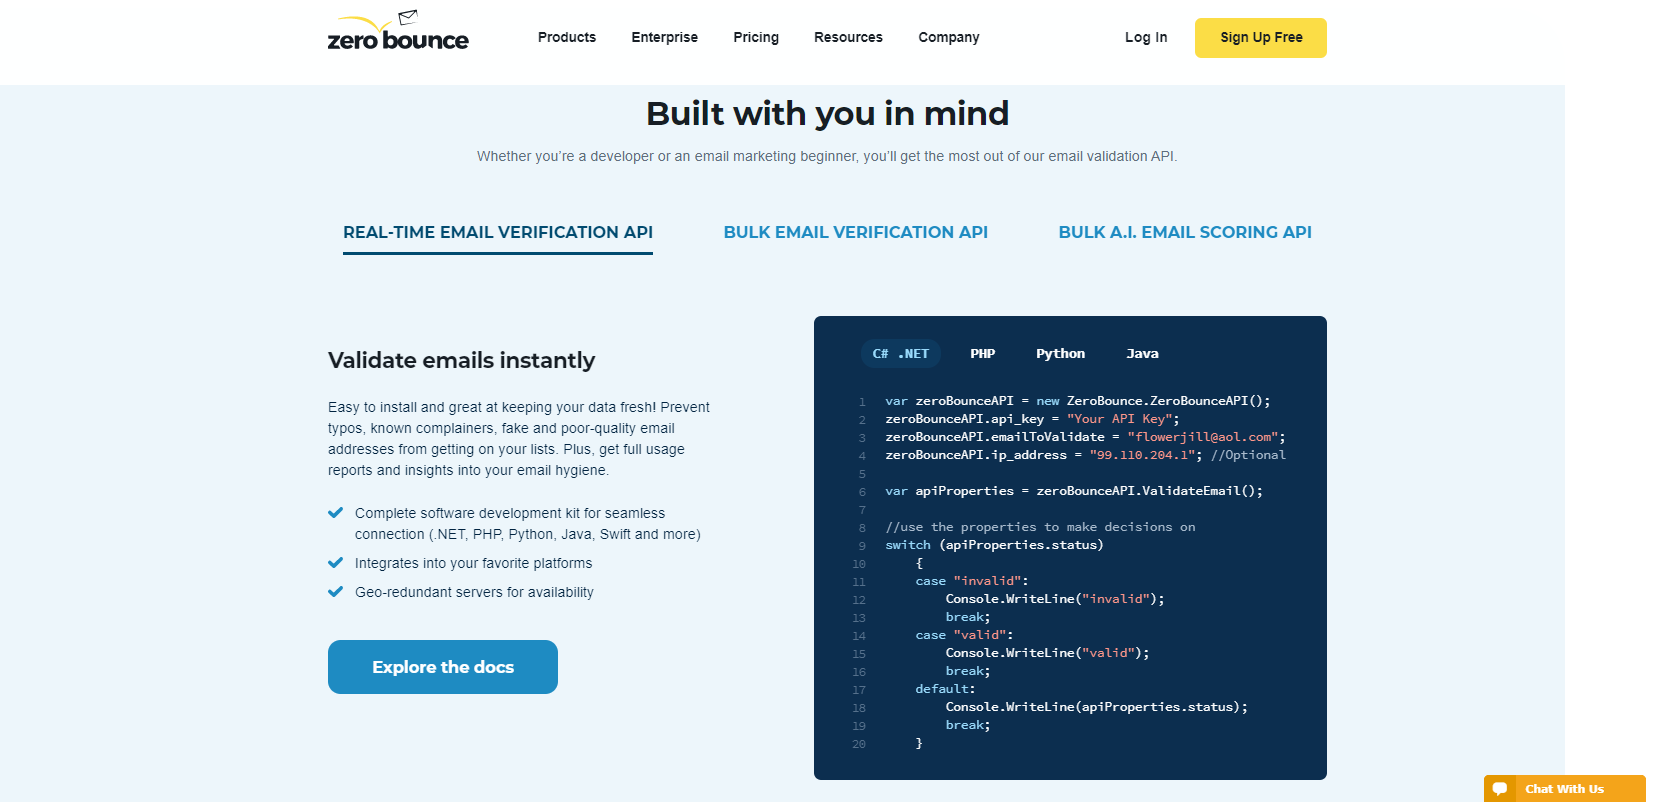 Validate emails in real-time with the ZeroBounce API